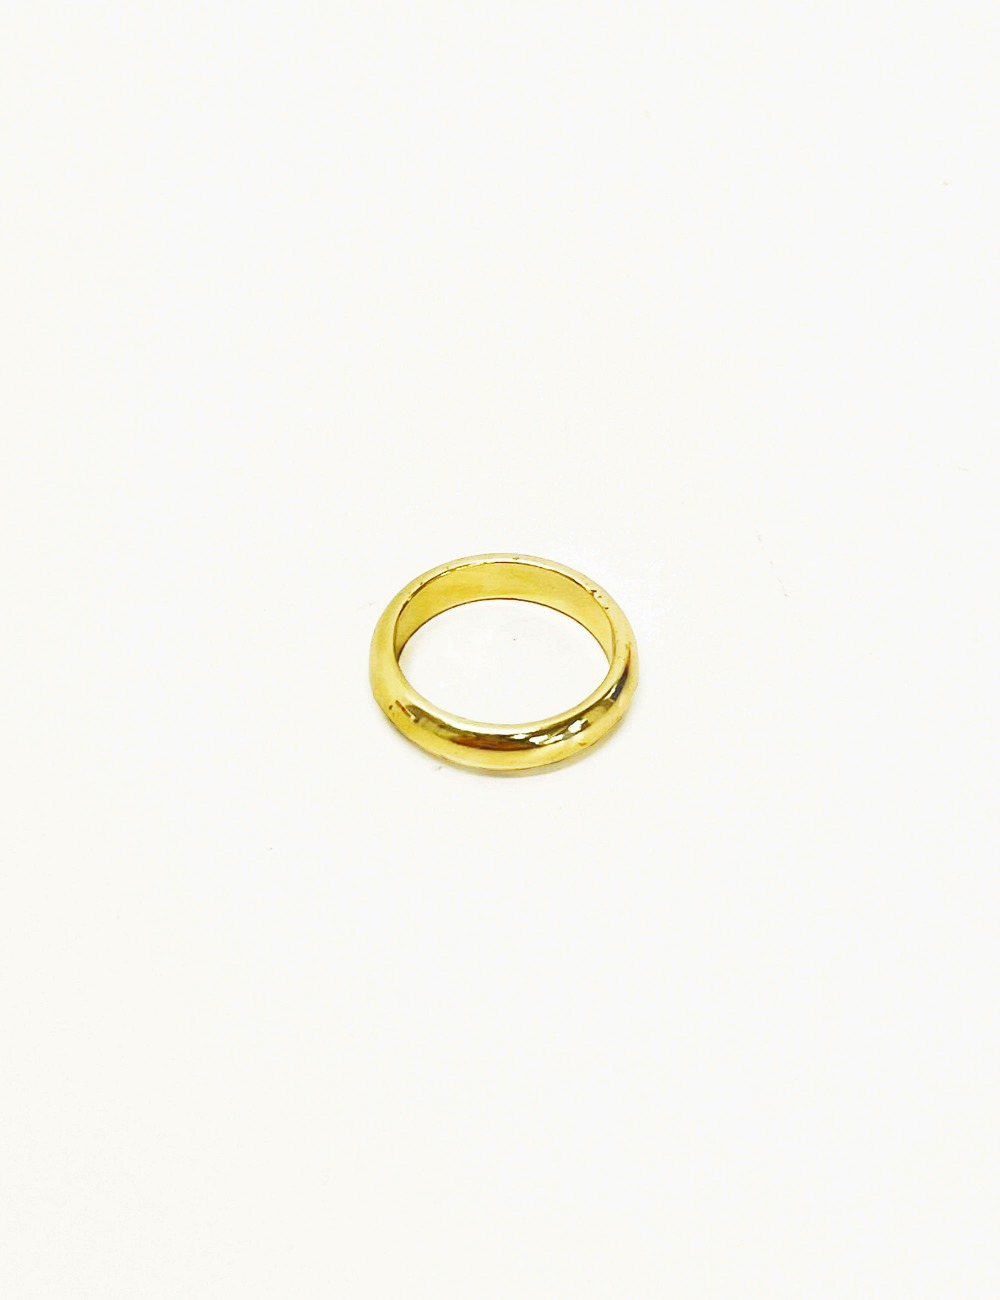 AFRICA IMPORT GOLD RING